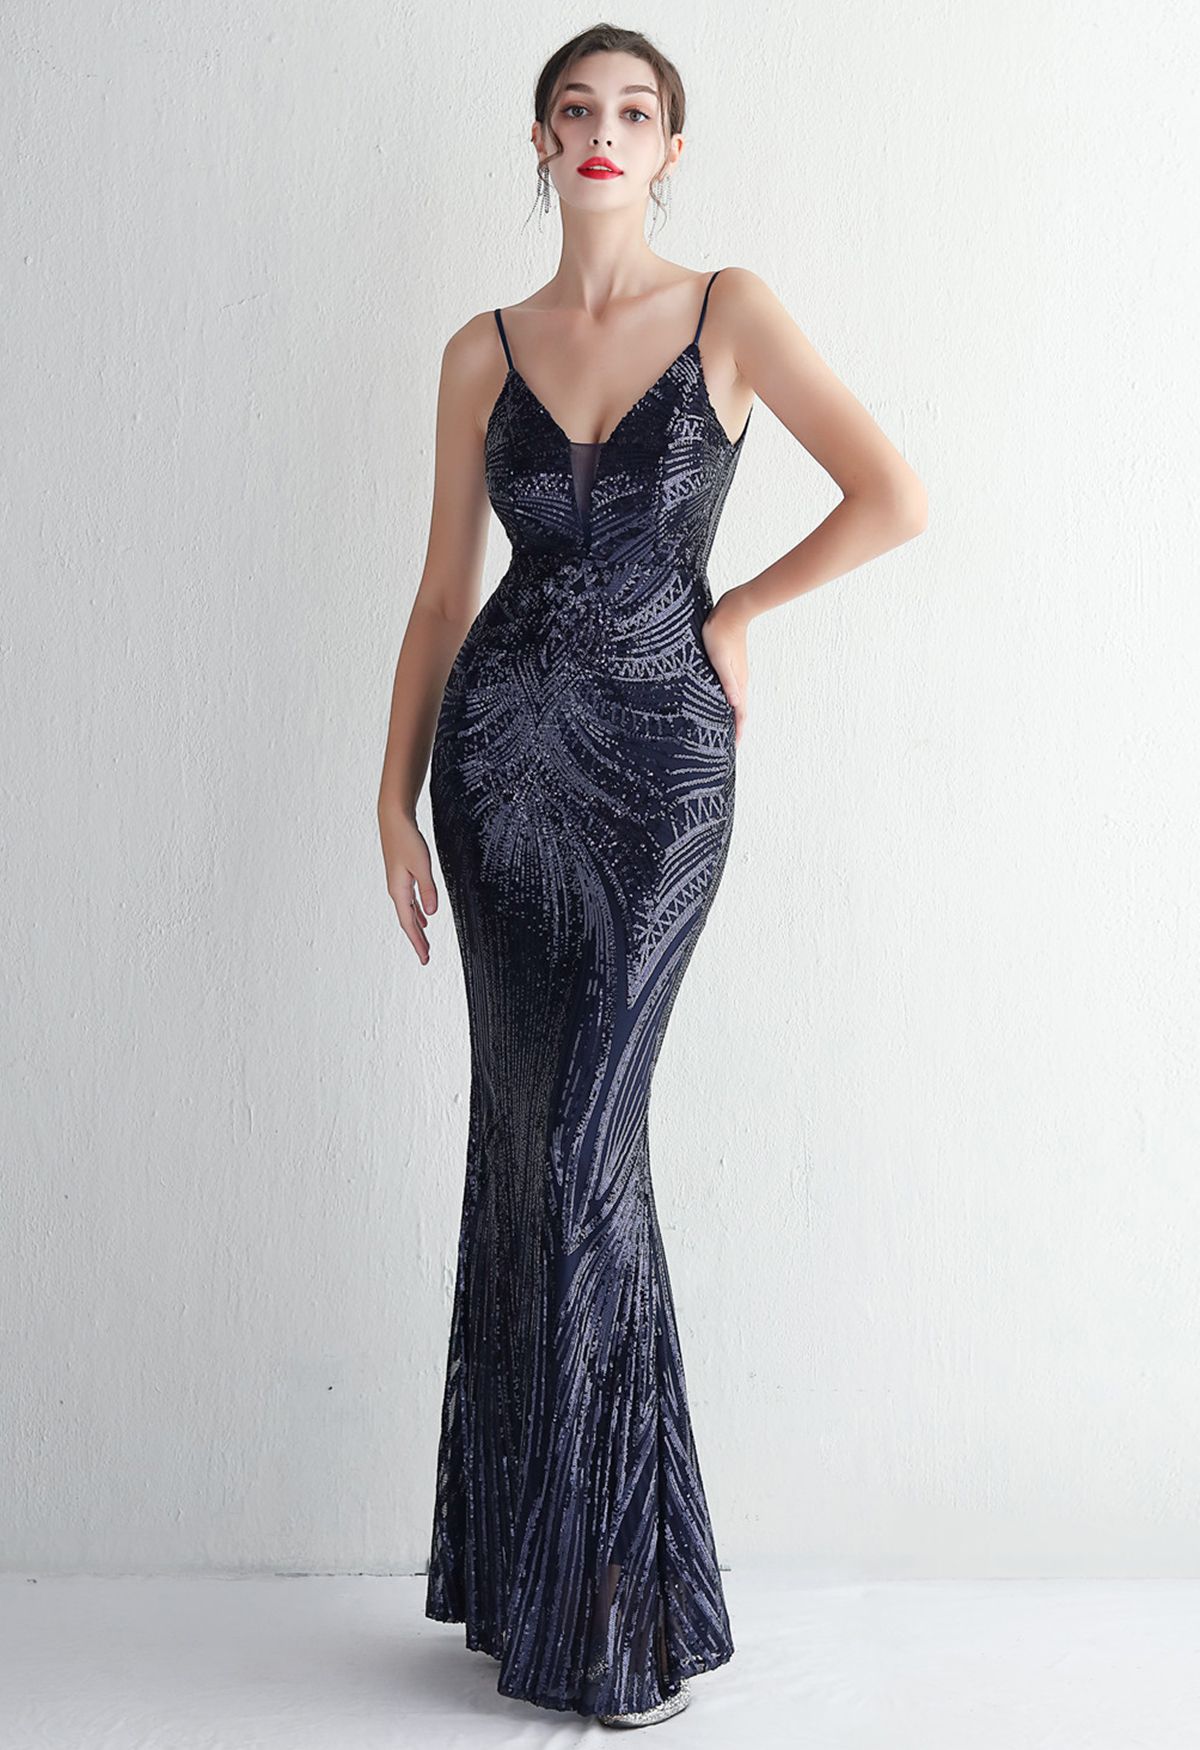 Glimmer Sequin Mermaid Cami Gown in Navy